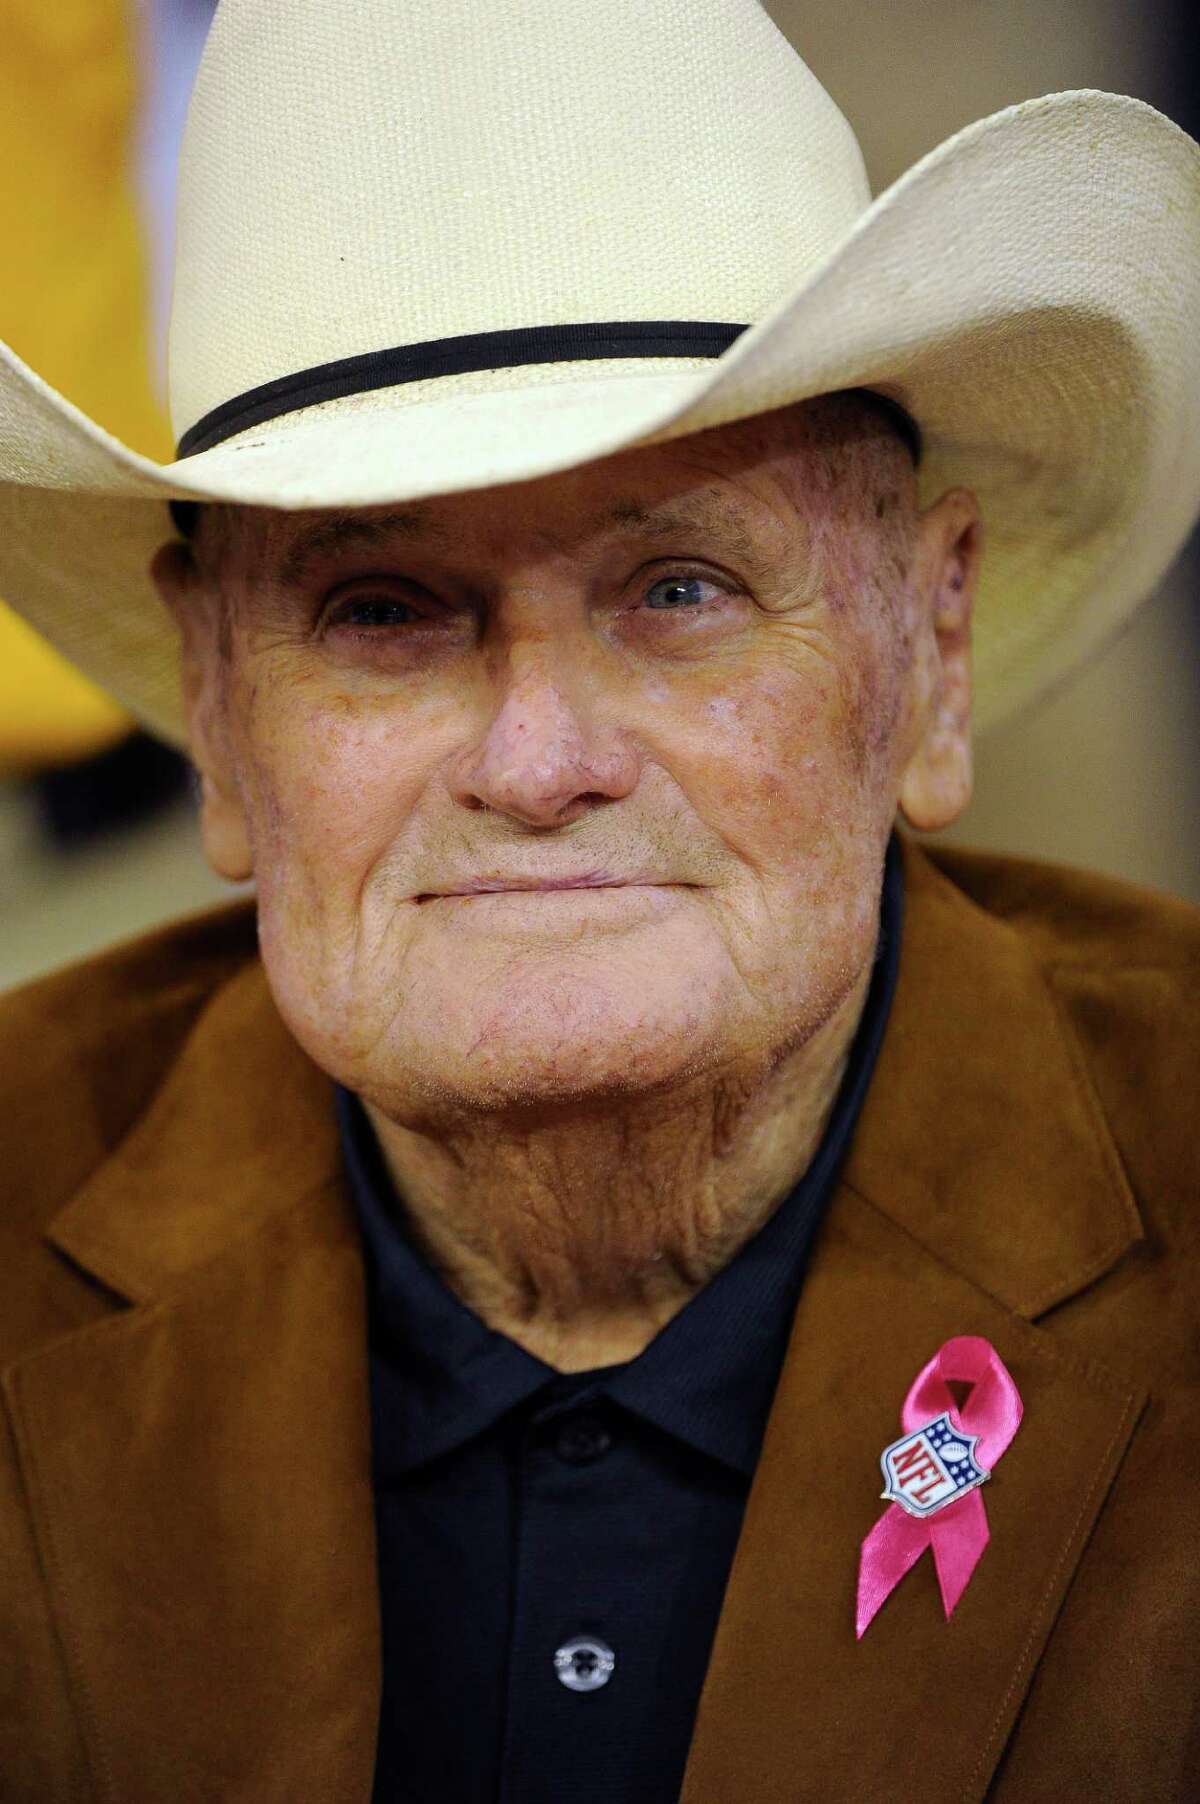 In this Oct. 14, 2012, photo, Former Houston Oilers coach Bum Phillips watches from the bench before an NFL football game between the Green Bay Packers and the Houston Texans in Houston. Phillips, the folksy Texas football icon who coached the Houston Oilers and New Orleans Saints, died Friday, Oct. 18, 2013. He was 90. (AP Photo/Dave Einsel)